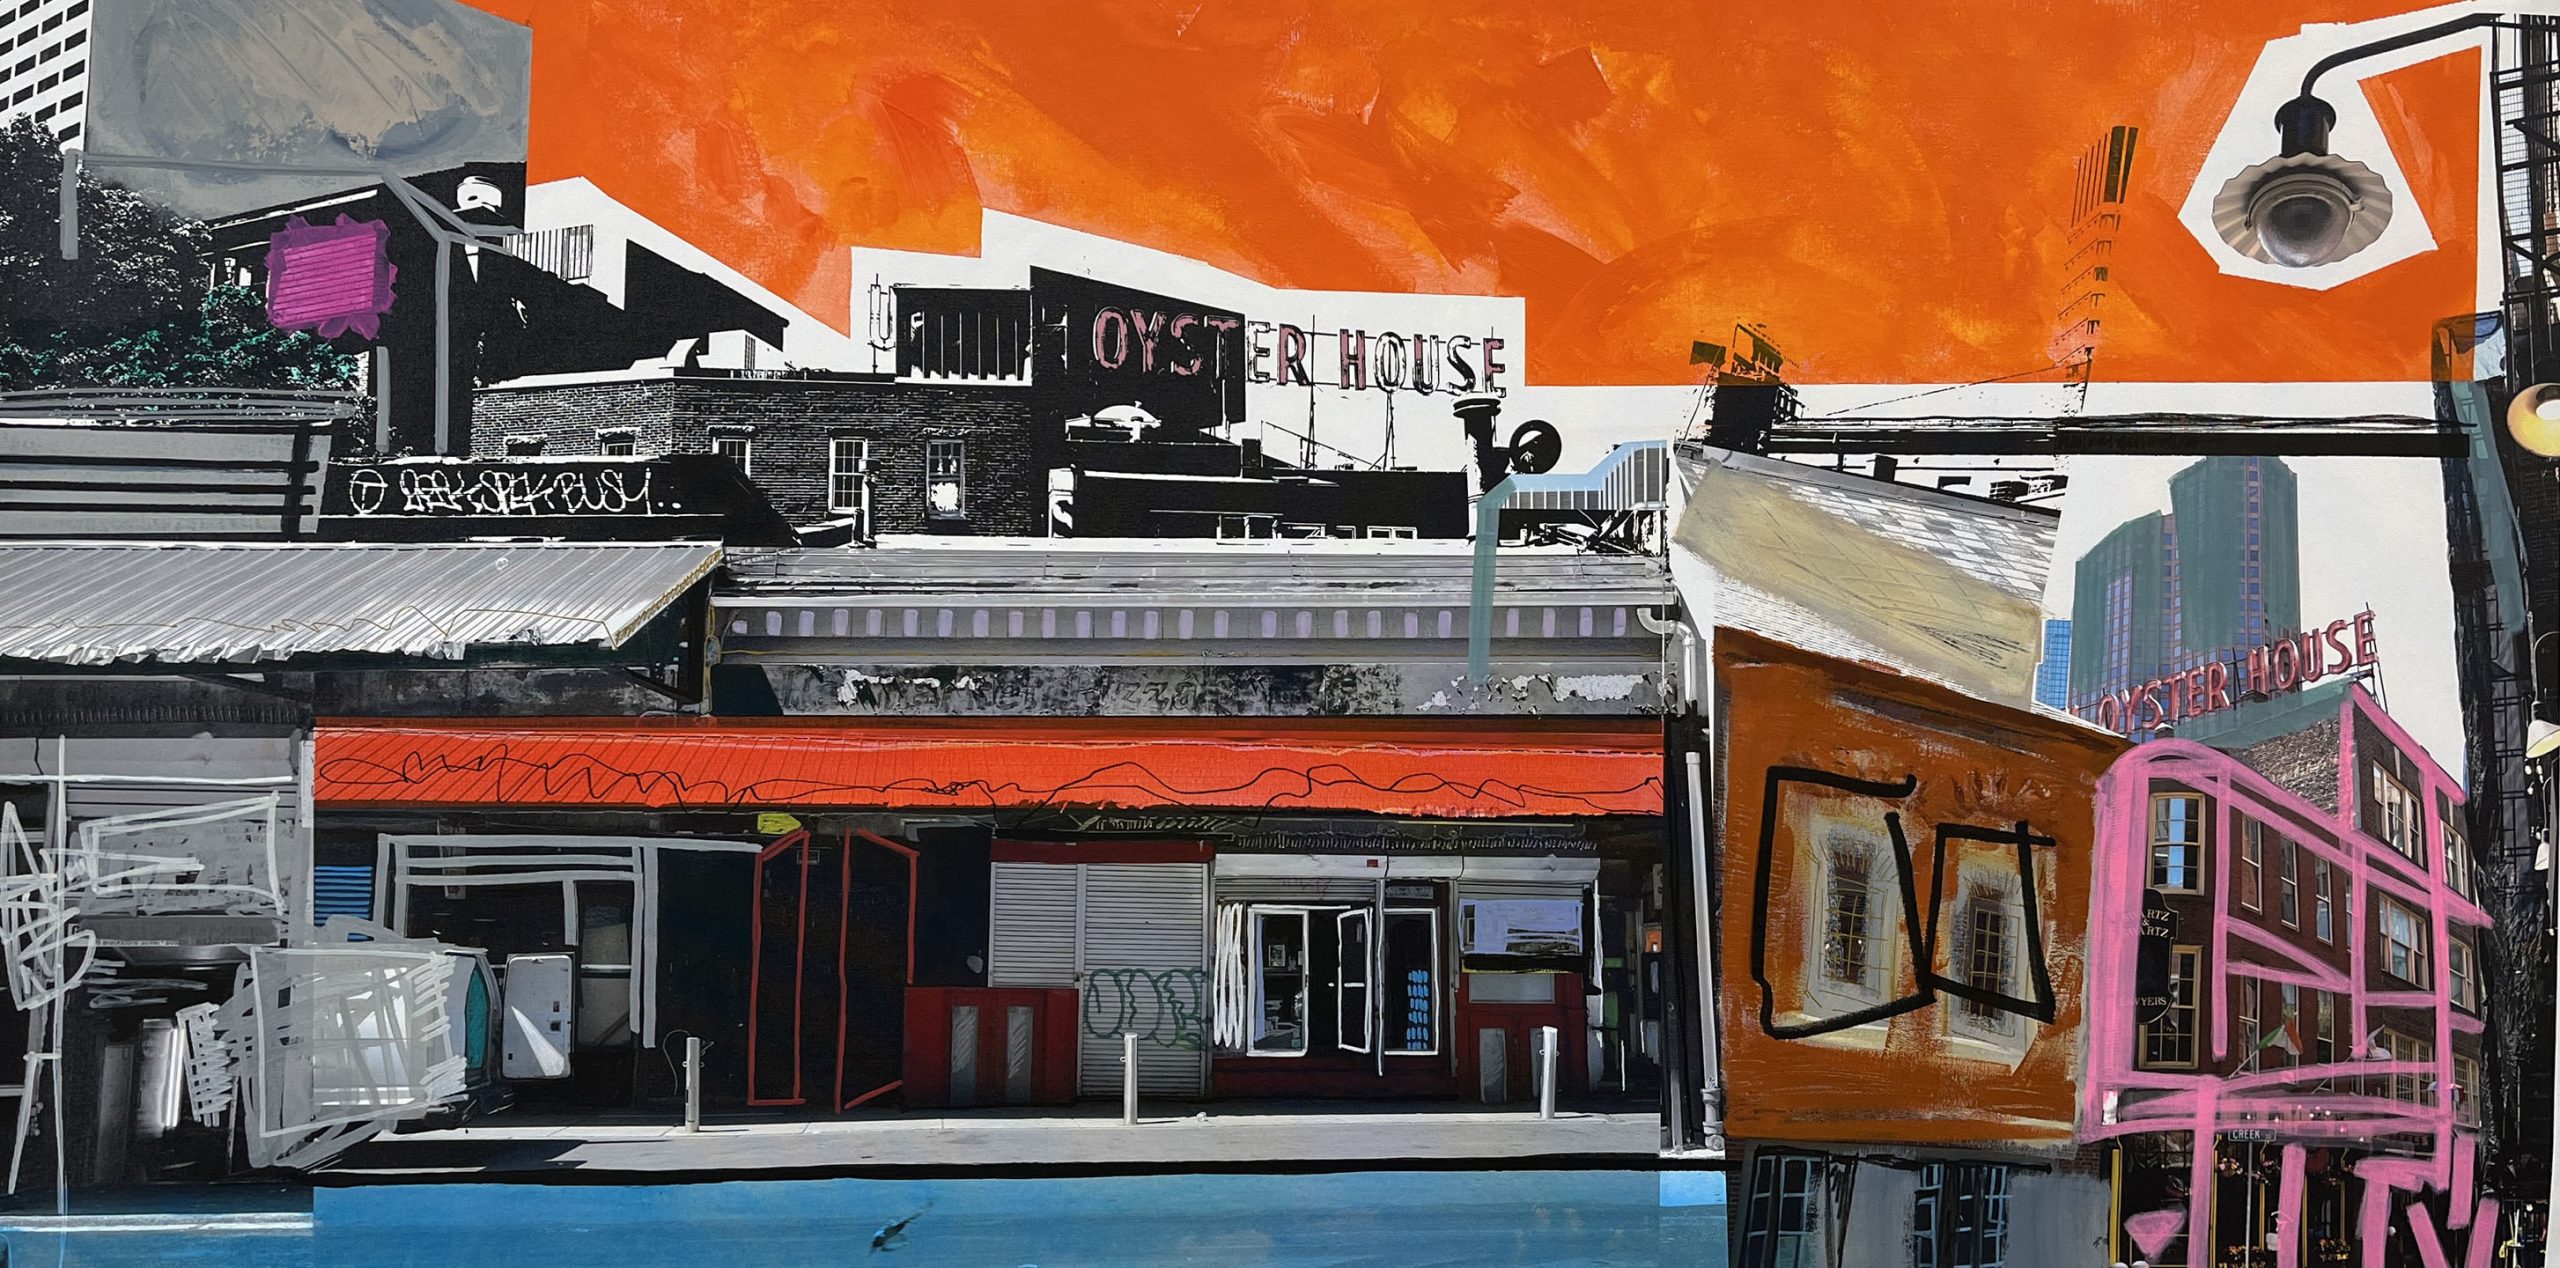 BOSTON OYSTER HOUSE 2023 30 X 60 PHOTOGRAPHY & MIXED MEDIA - SOLD -